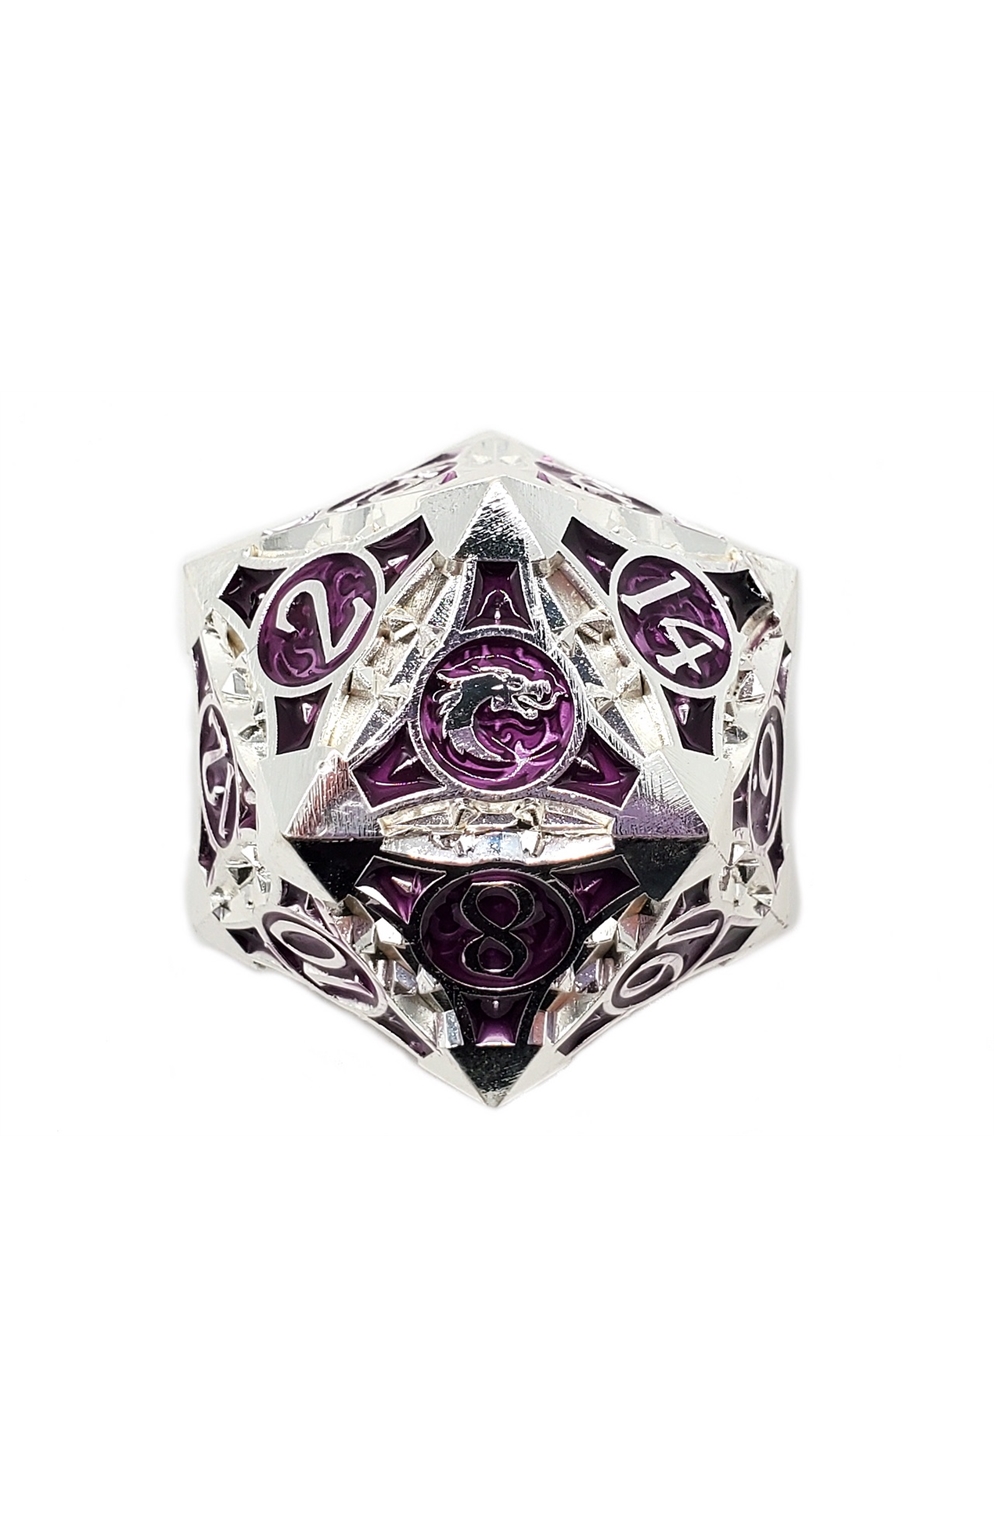 Old School 40Mm D20 Metal Die: Gnome Forged: Silver & Purple